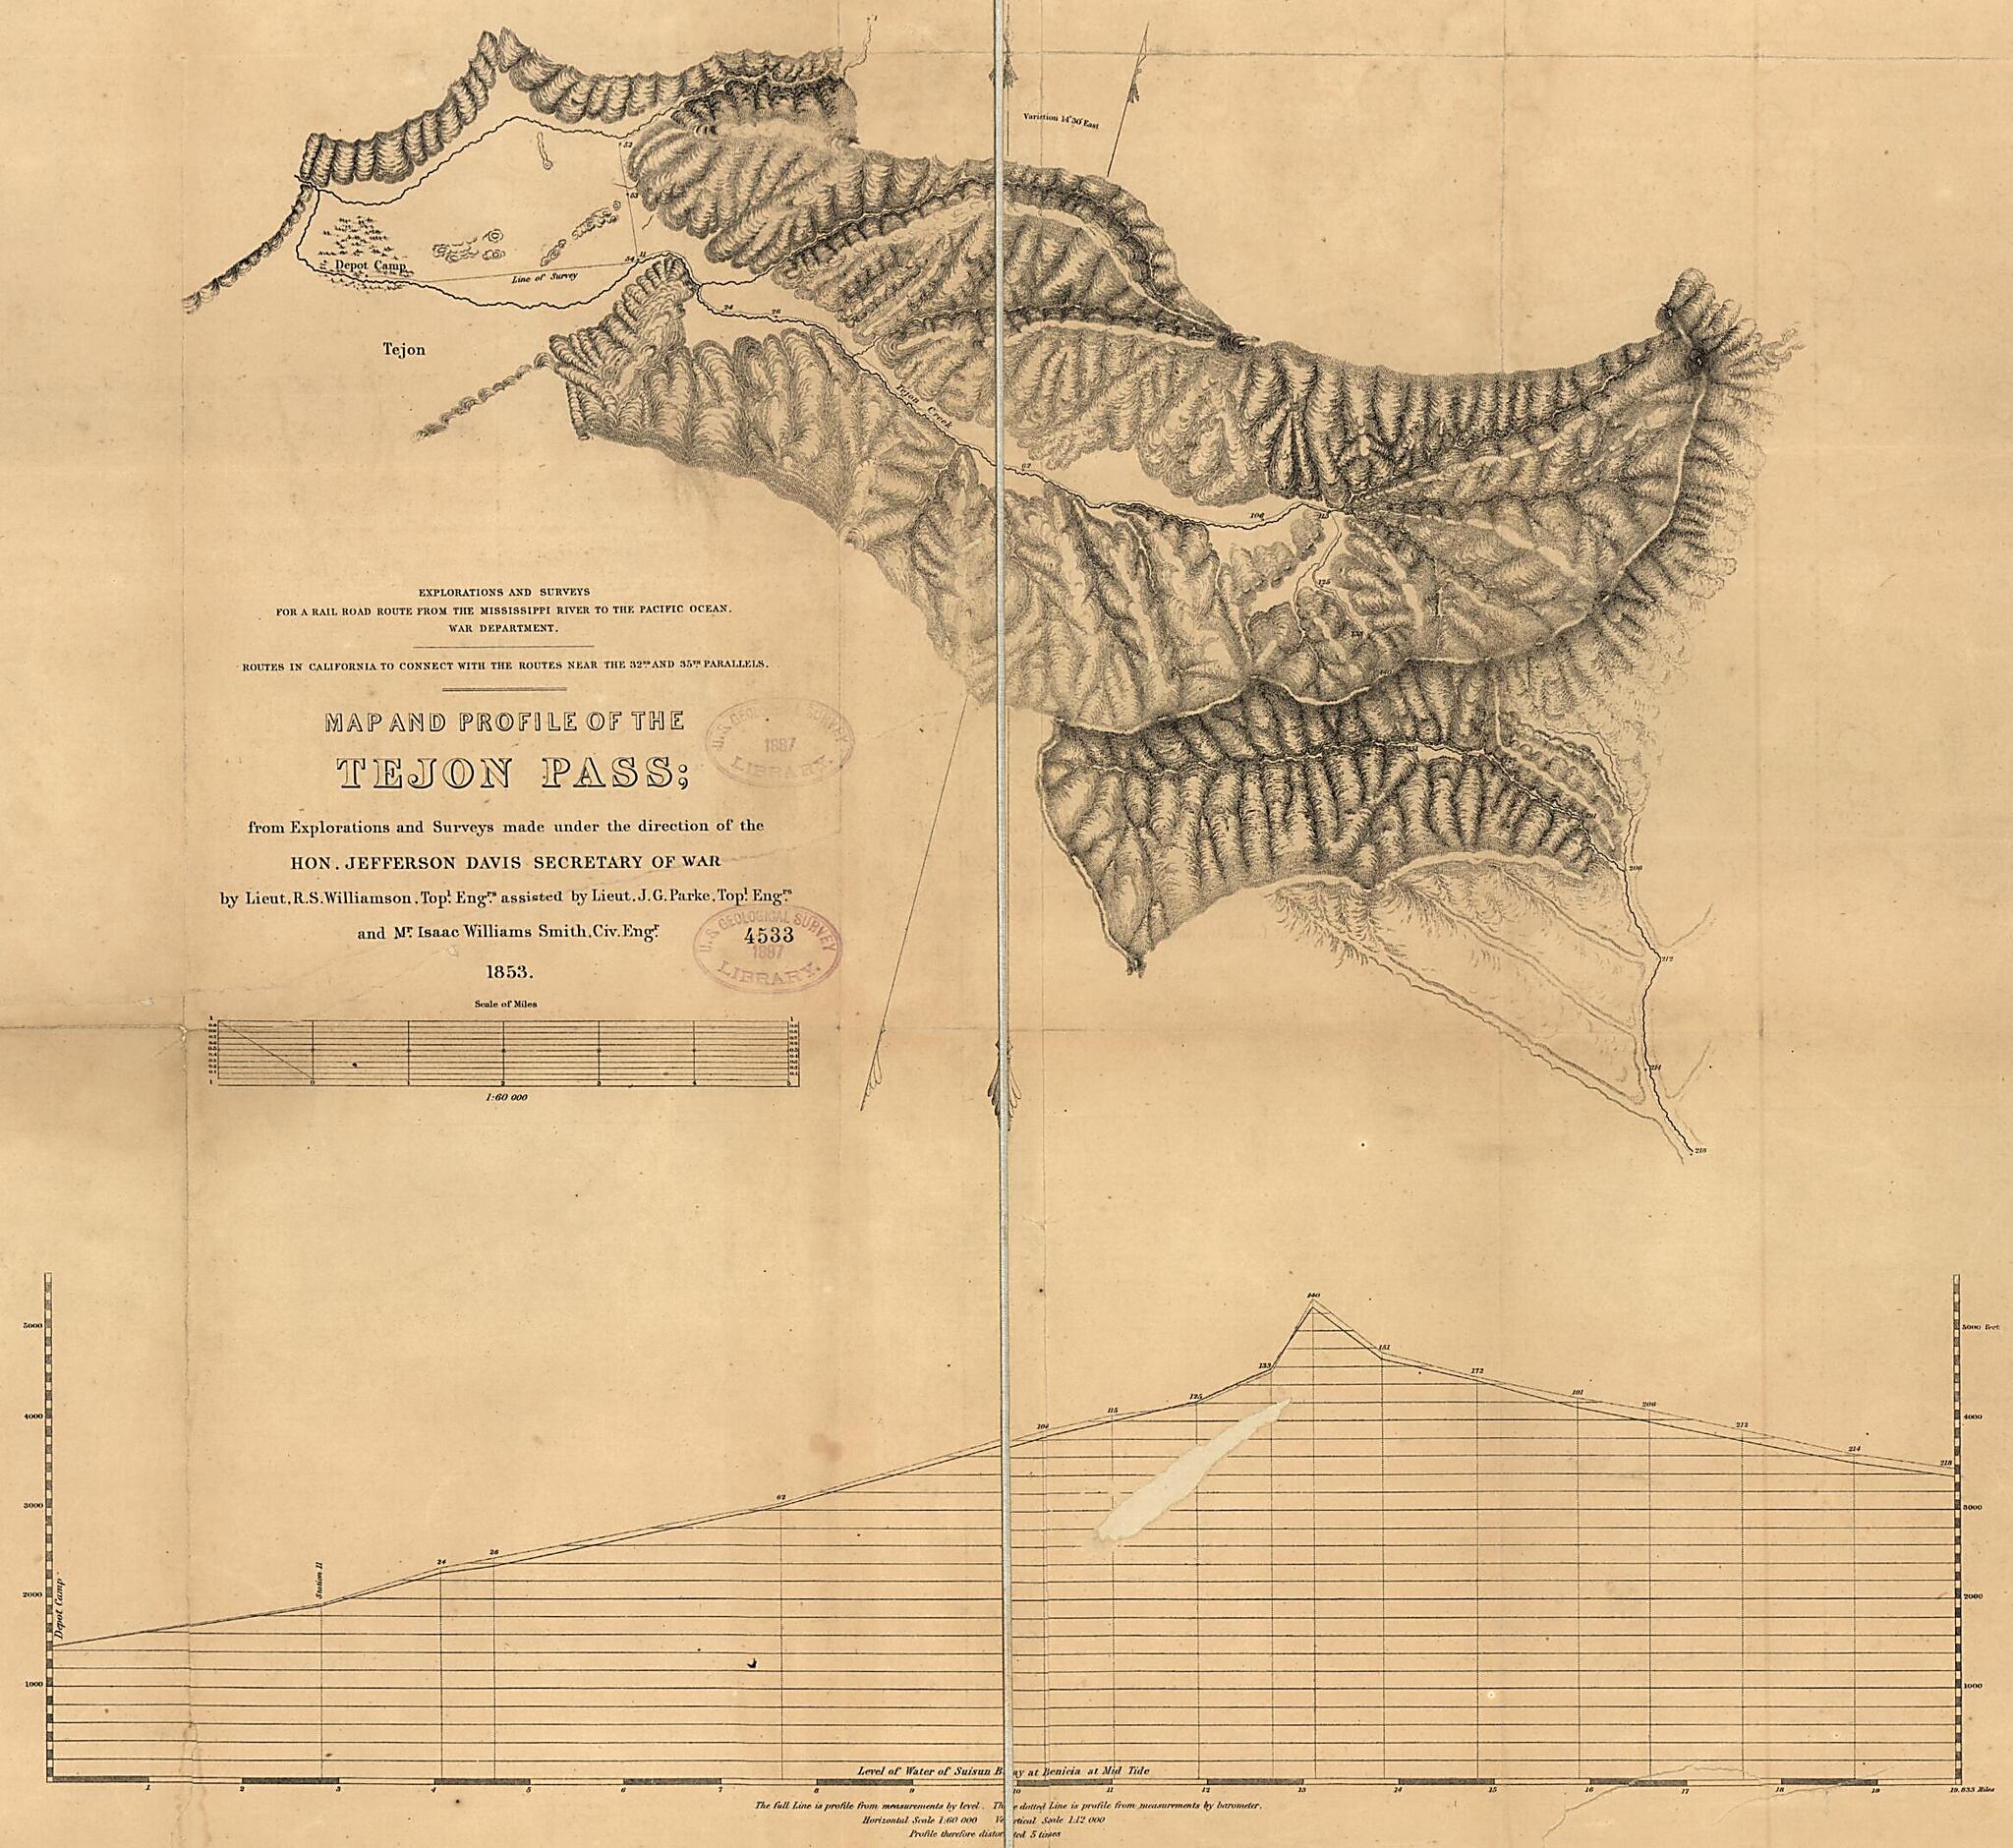 This old map of Map and Profile of the Tejon Pass : from Explorations and Surveys from 1853 was created by Jefferson Davis, John G. Parke, Selmar Siebert,  United States. War Department, Issac Williams Smith, R. S. (Robert Stockton) Williamson in 1853